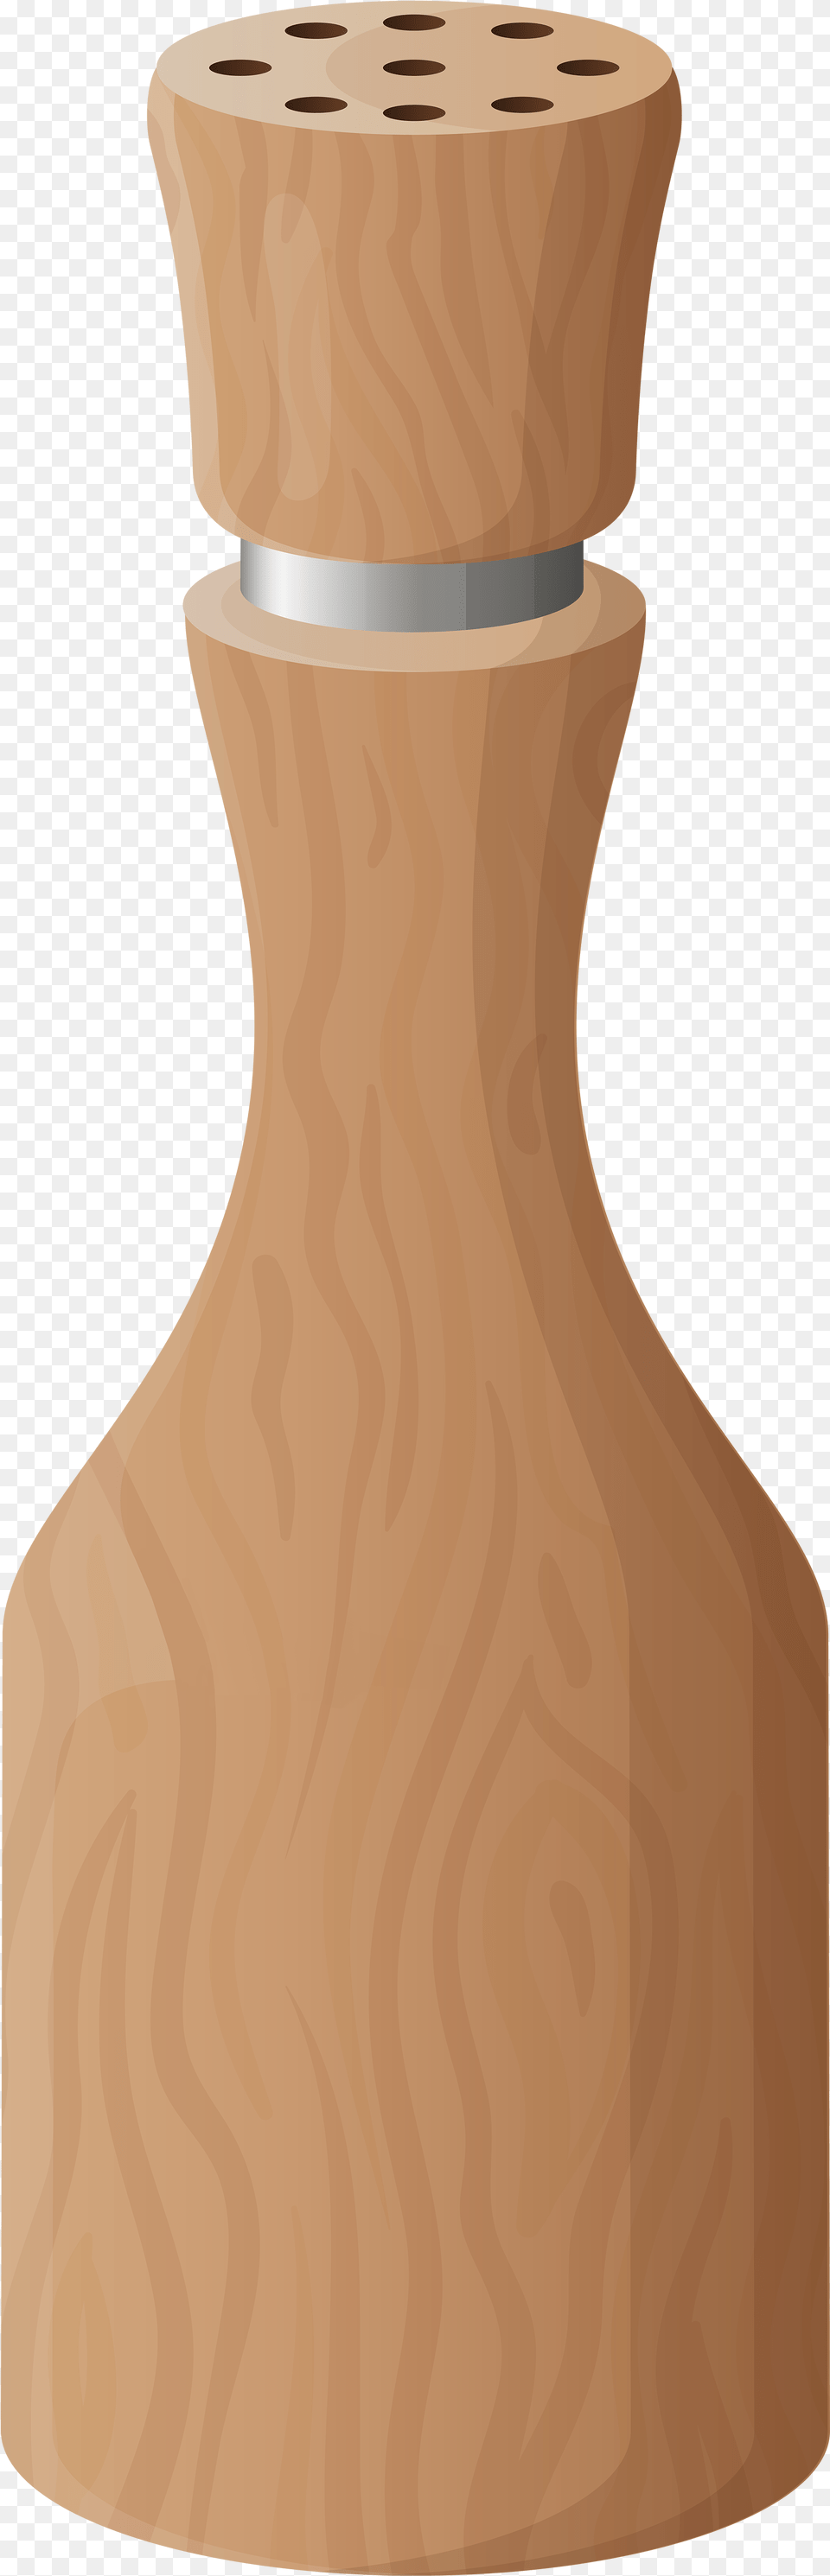 Pepper Milltitle Pepper Mill Peppermill, Jar, Pottery, Vase, Smoke Pipe Free Transparent Png